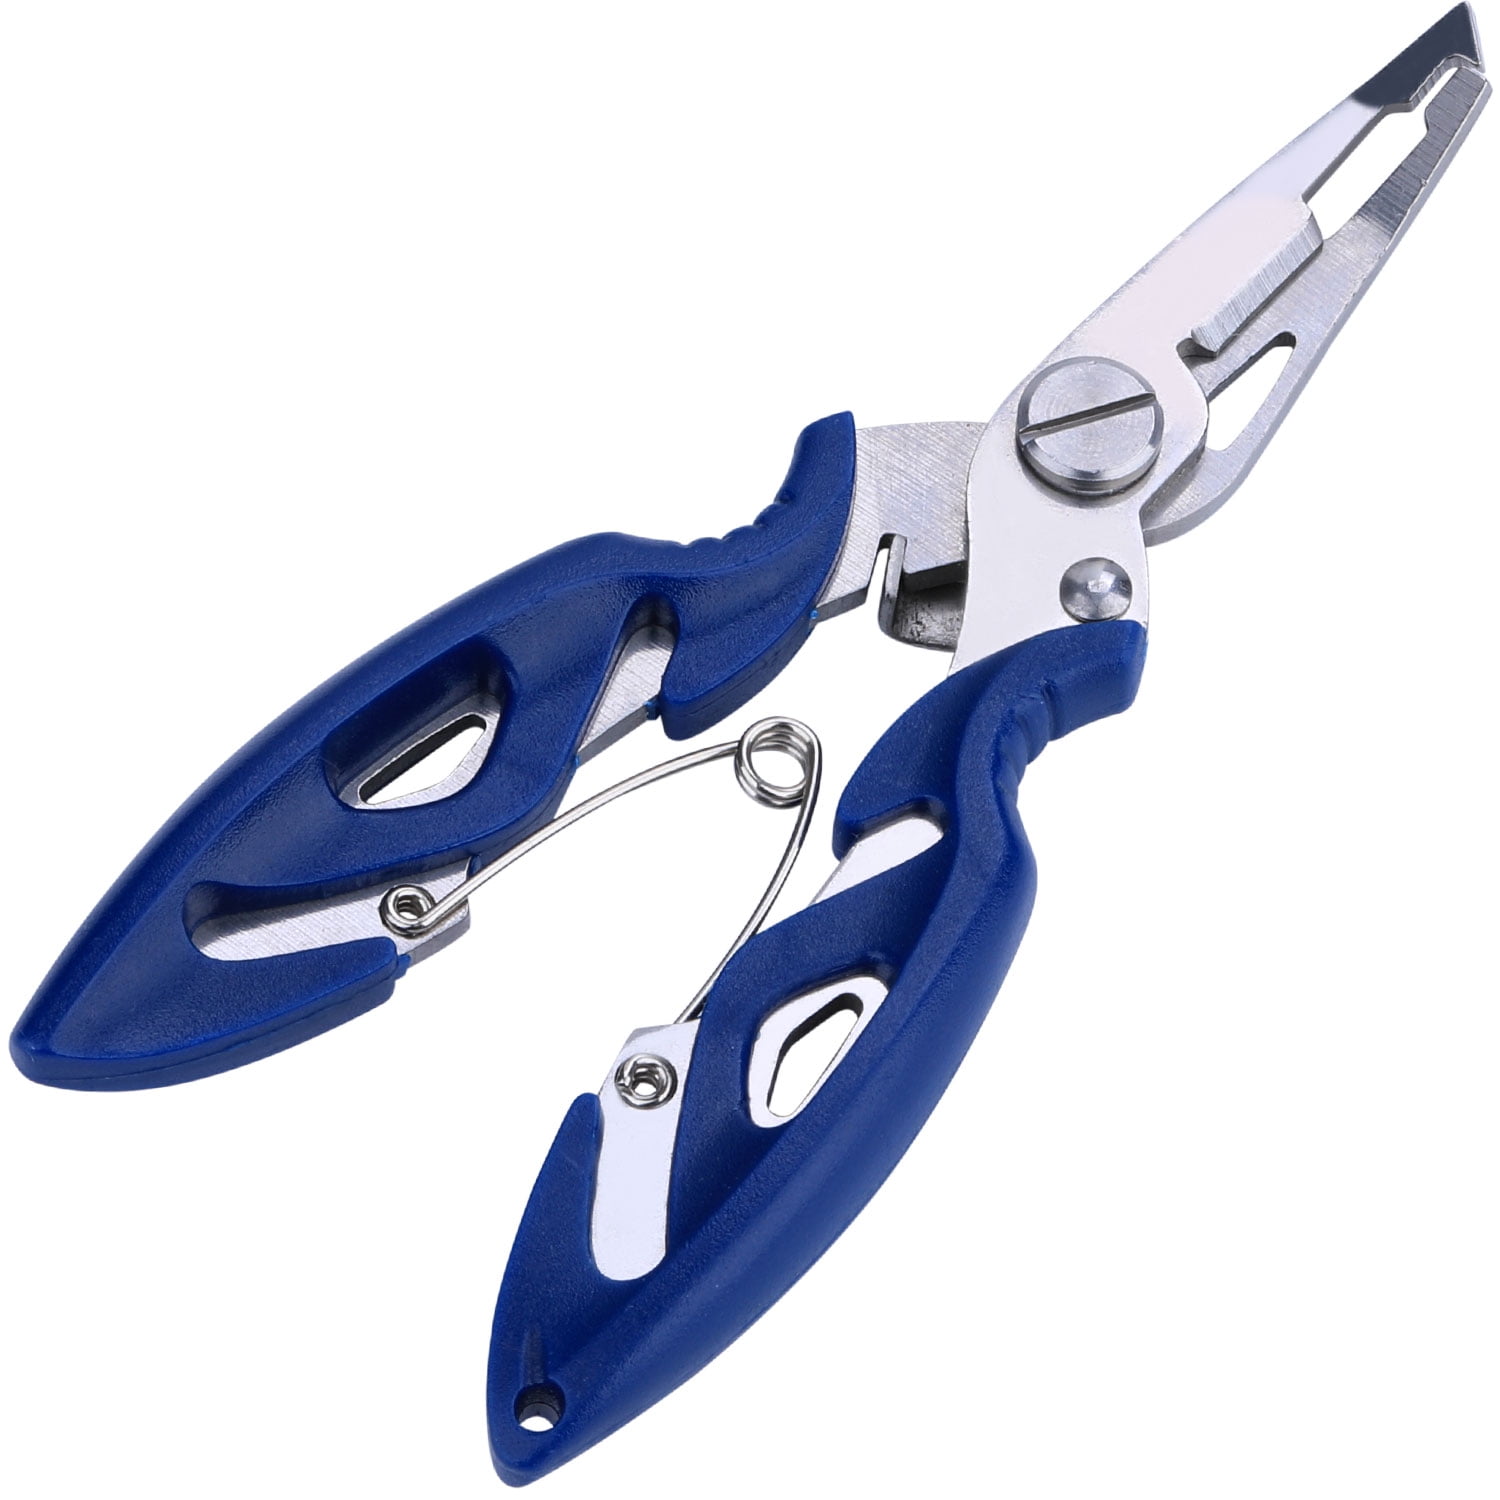 TOP QUALITY Fishing Pliers Multi-tool Scisors Hook Removal Disgorger Line Cutter 